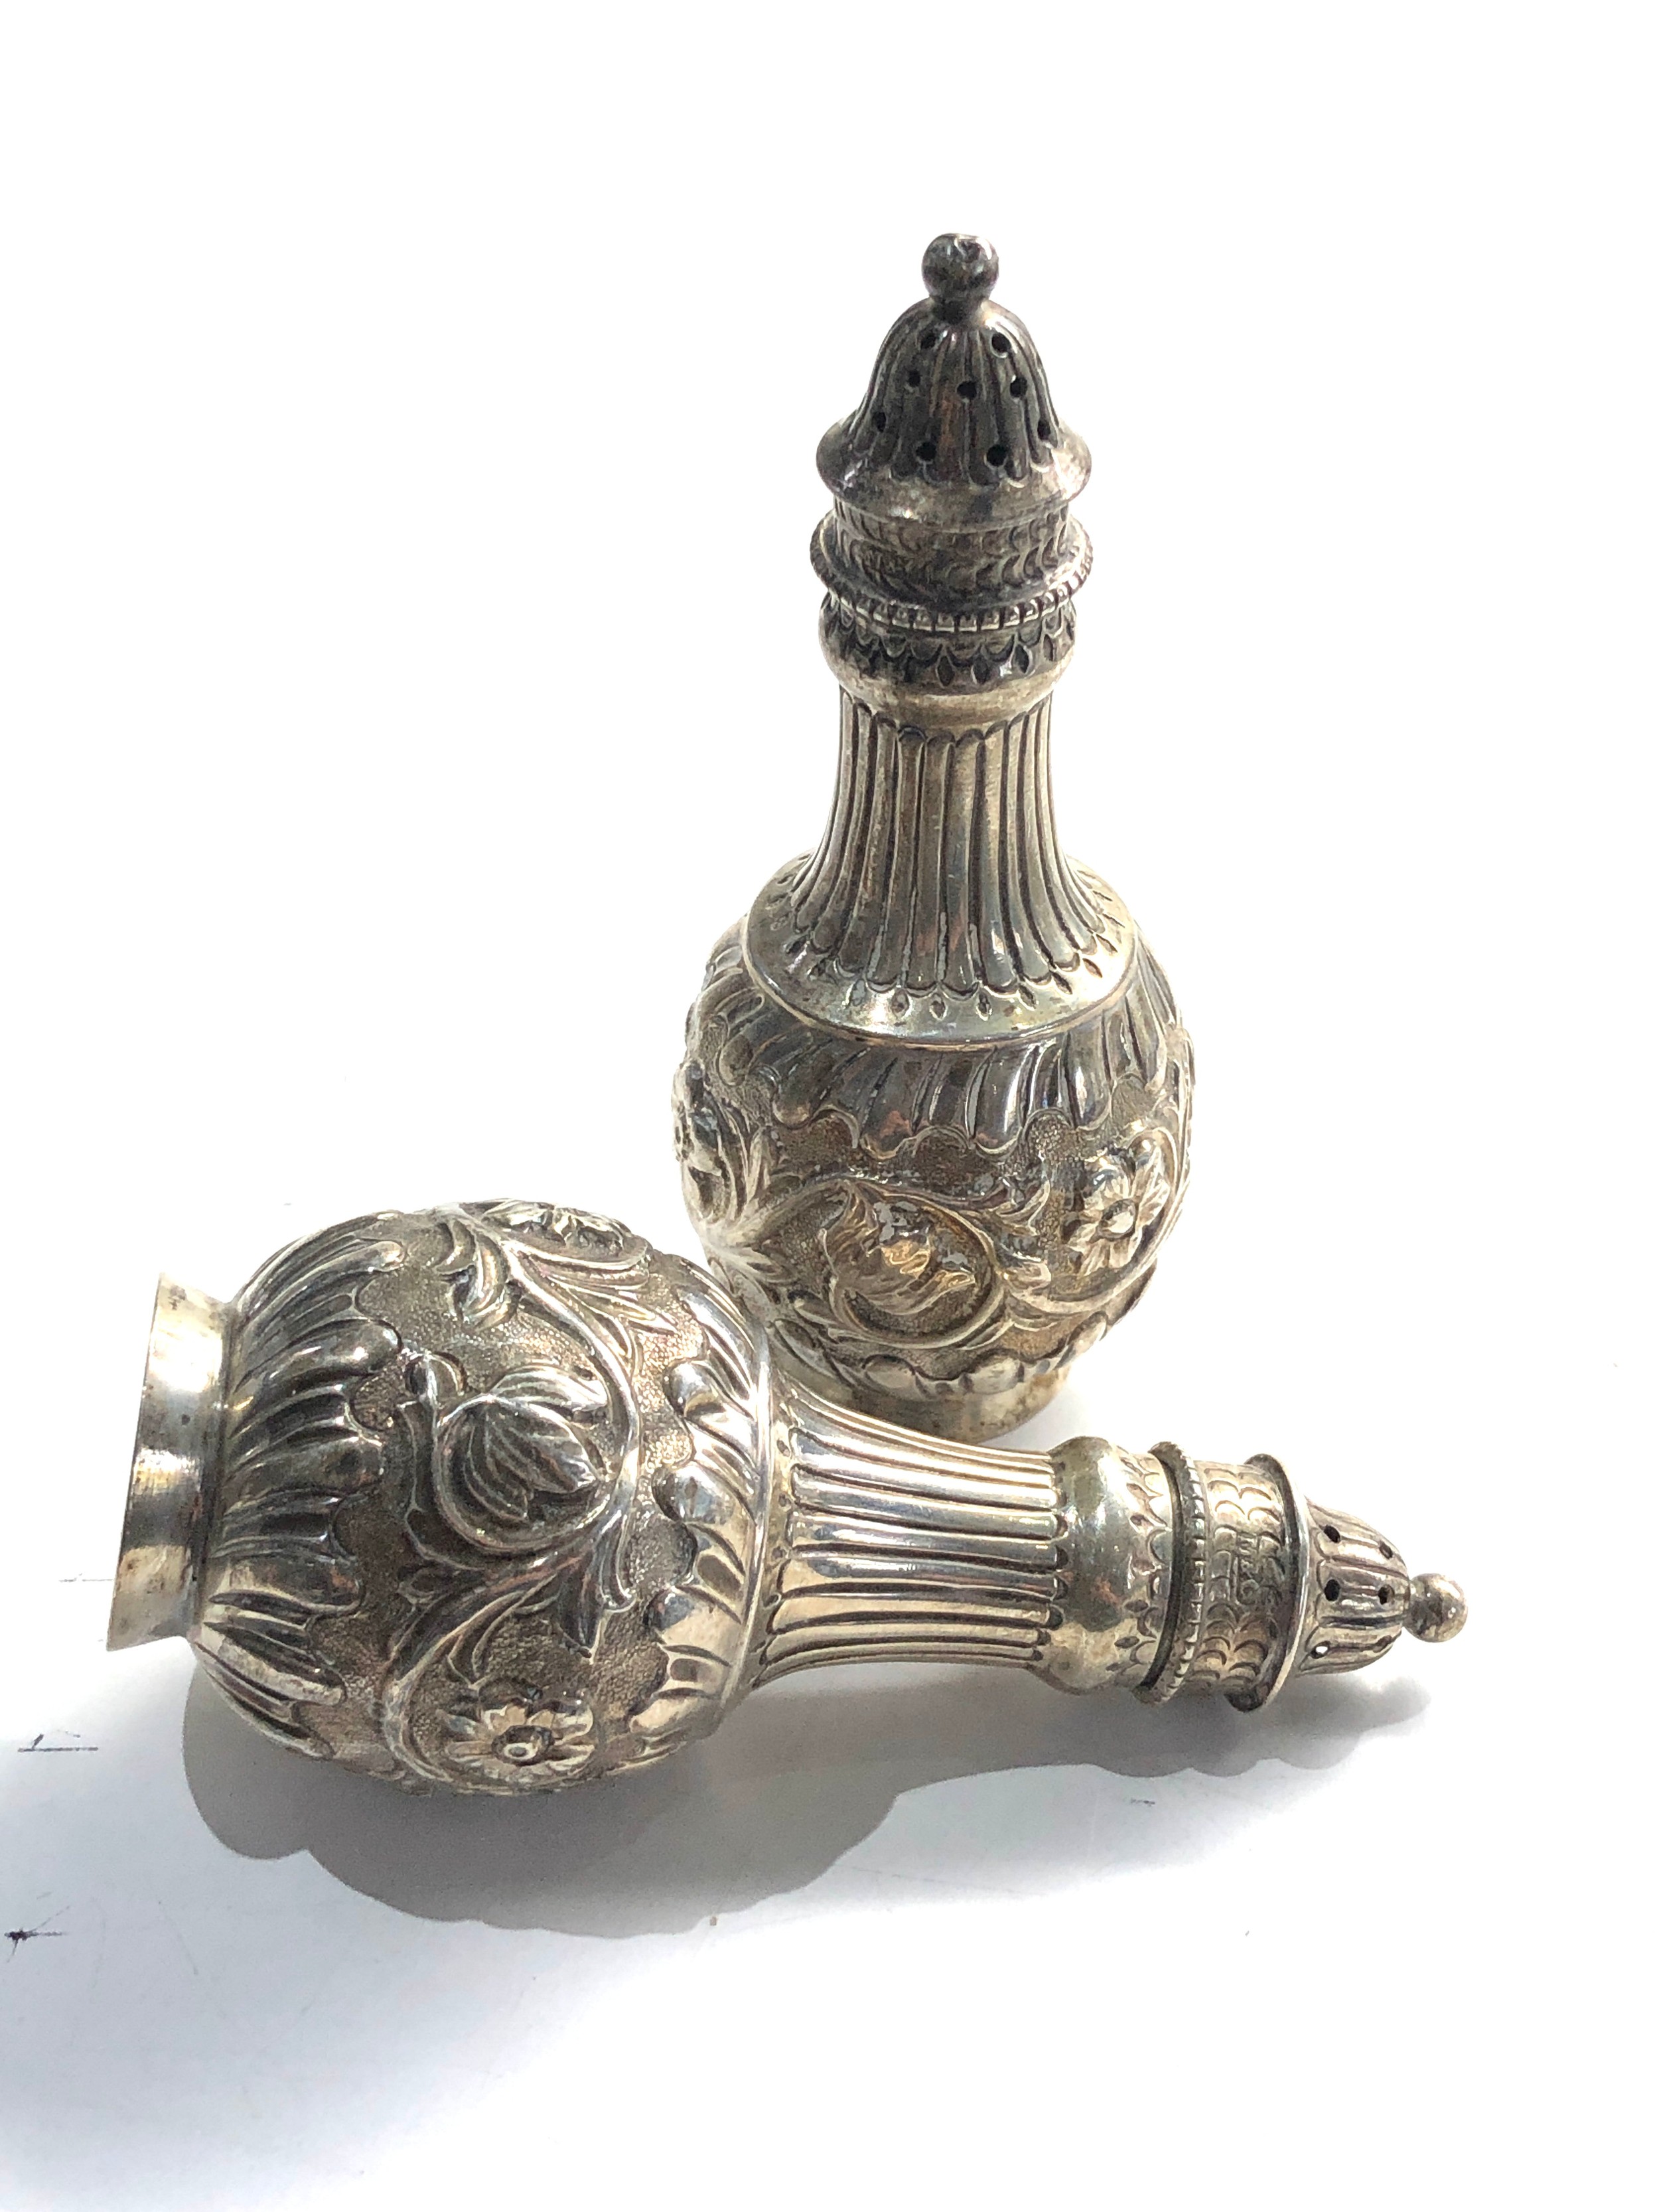 Pair of victorian scottish silver salts by mackay & chisholm weight 82g - Image 2 of 3